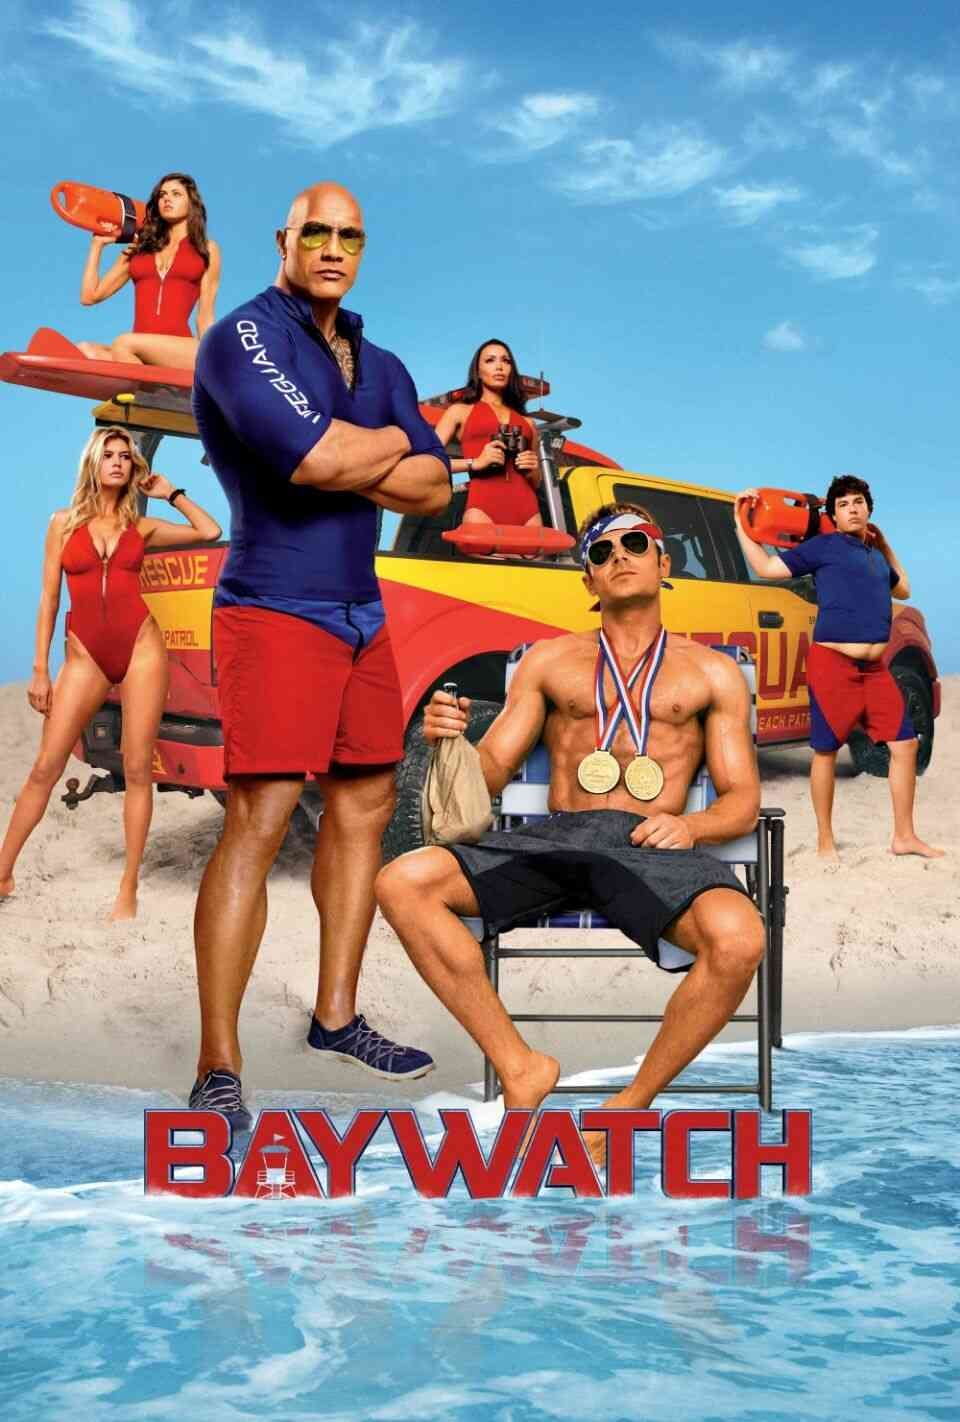 Read Baywatch screenplay (poster)